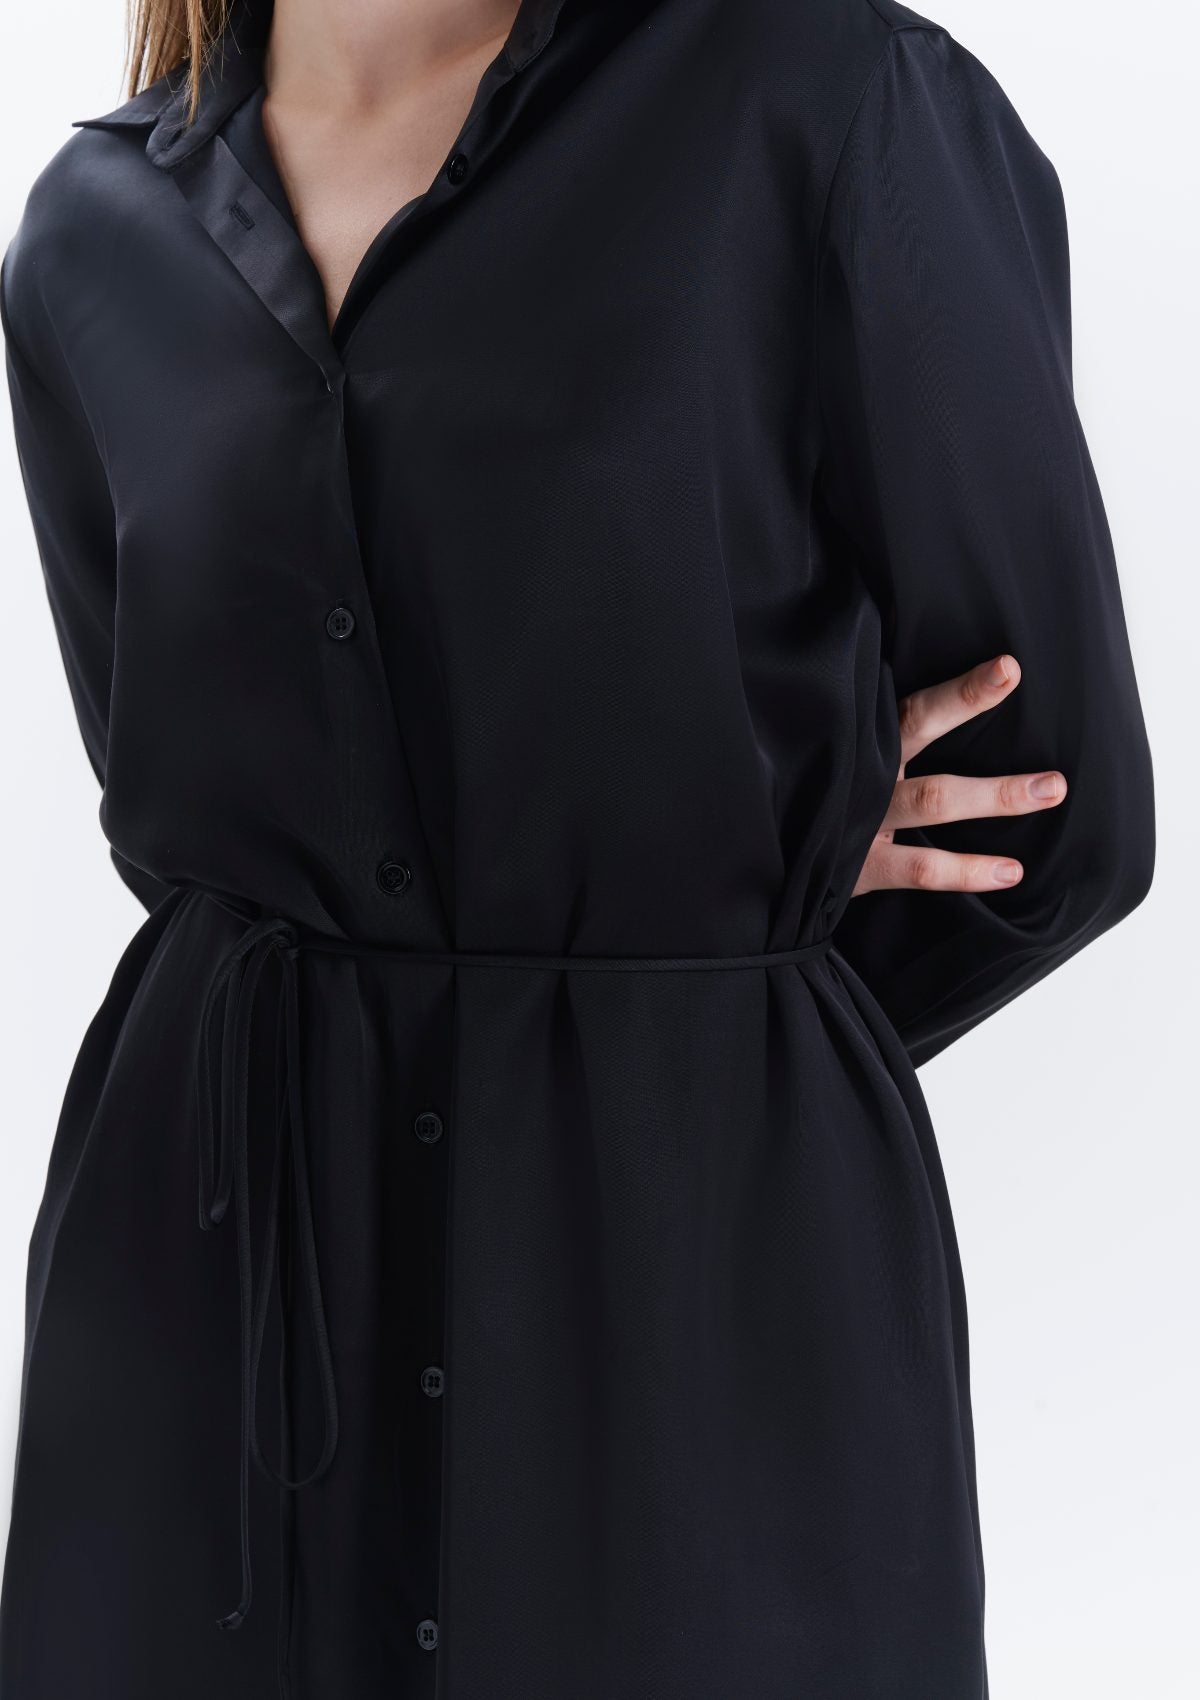 buttoned-black-belted-shirt-dress-by Silk & tonic